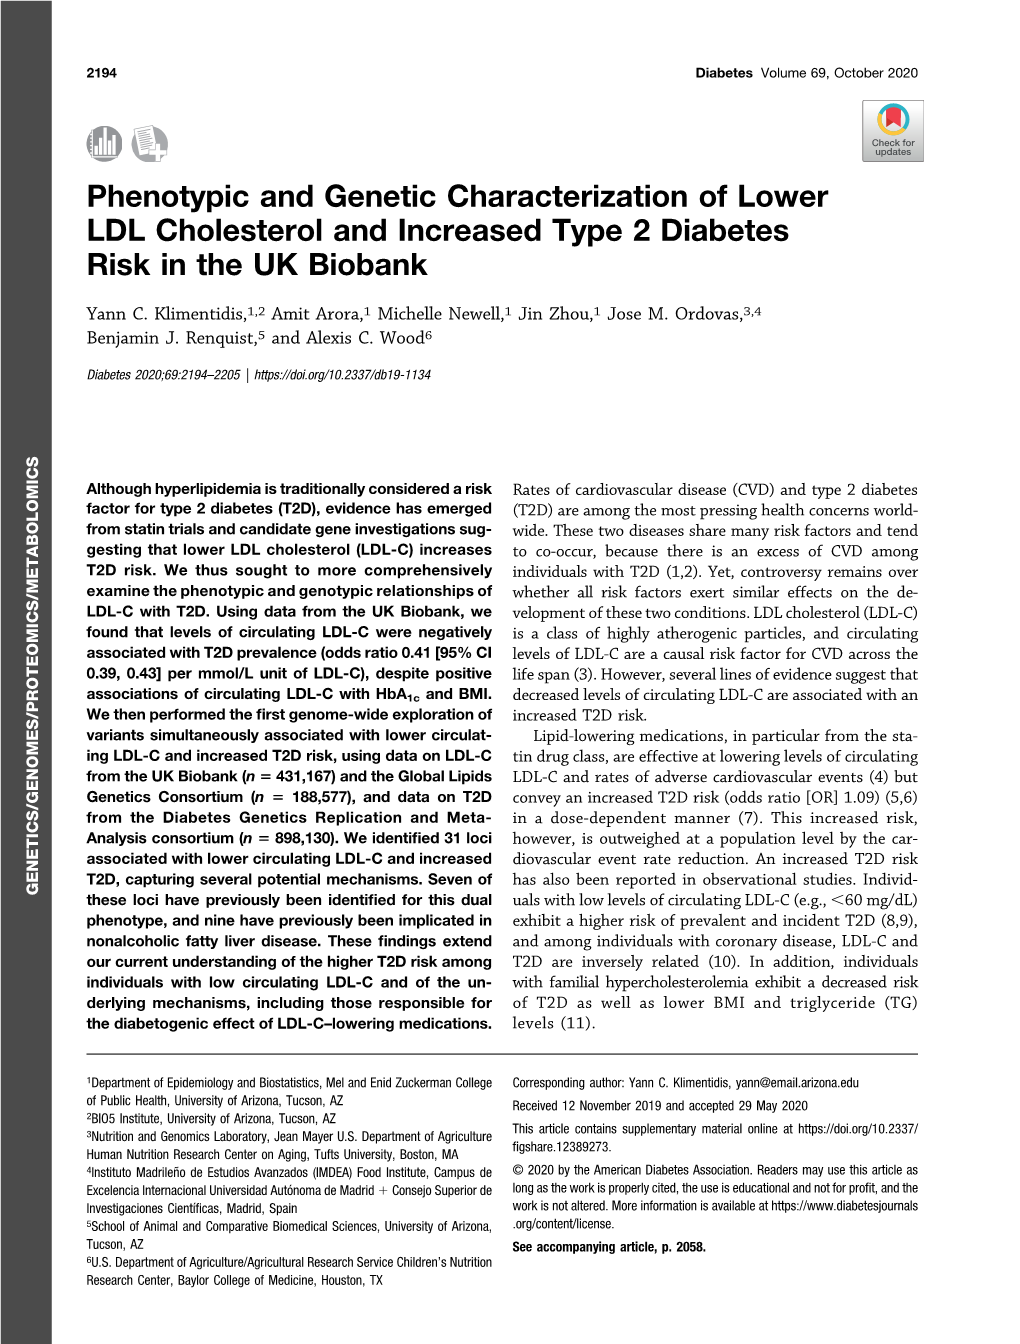 Phenotypic and Genetic Characterization of Lower LDL Cholesterol and Increased Type 2 Diabetes Risk in the UK Biobank